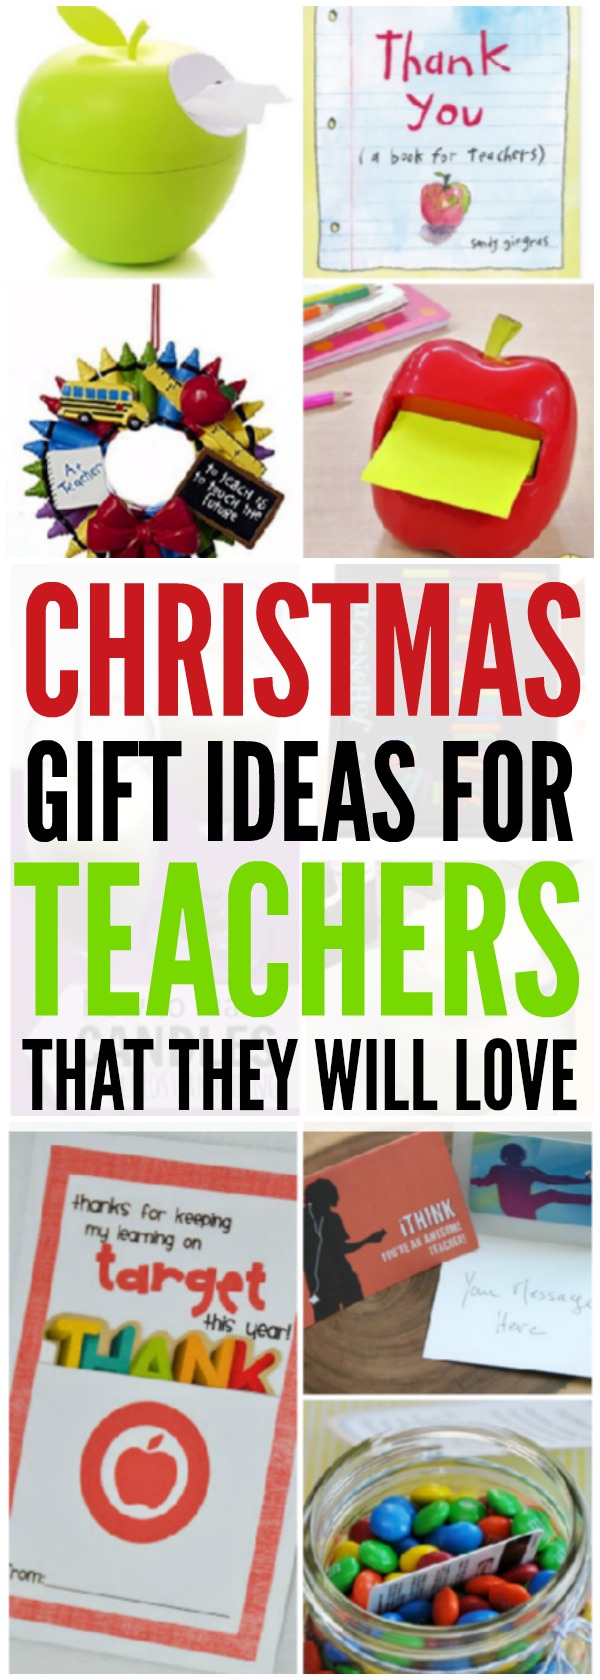 20 Christmas gift ideas for teachers. These gifts for teachers are frugal & fun. We have some homemade gift ideas for teachers and even fun gift card ideas. 